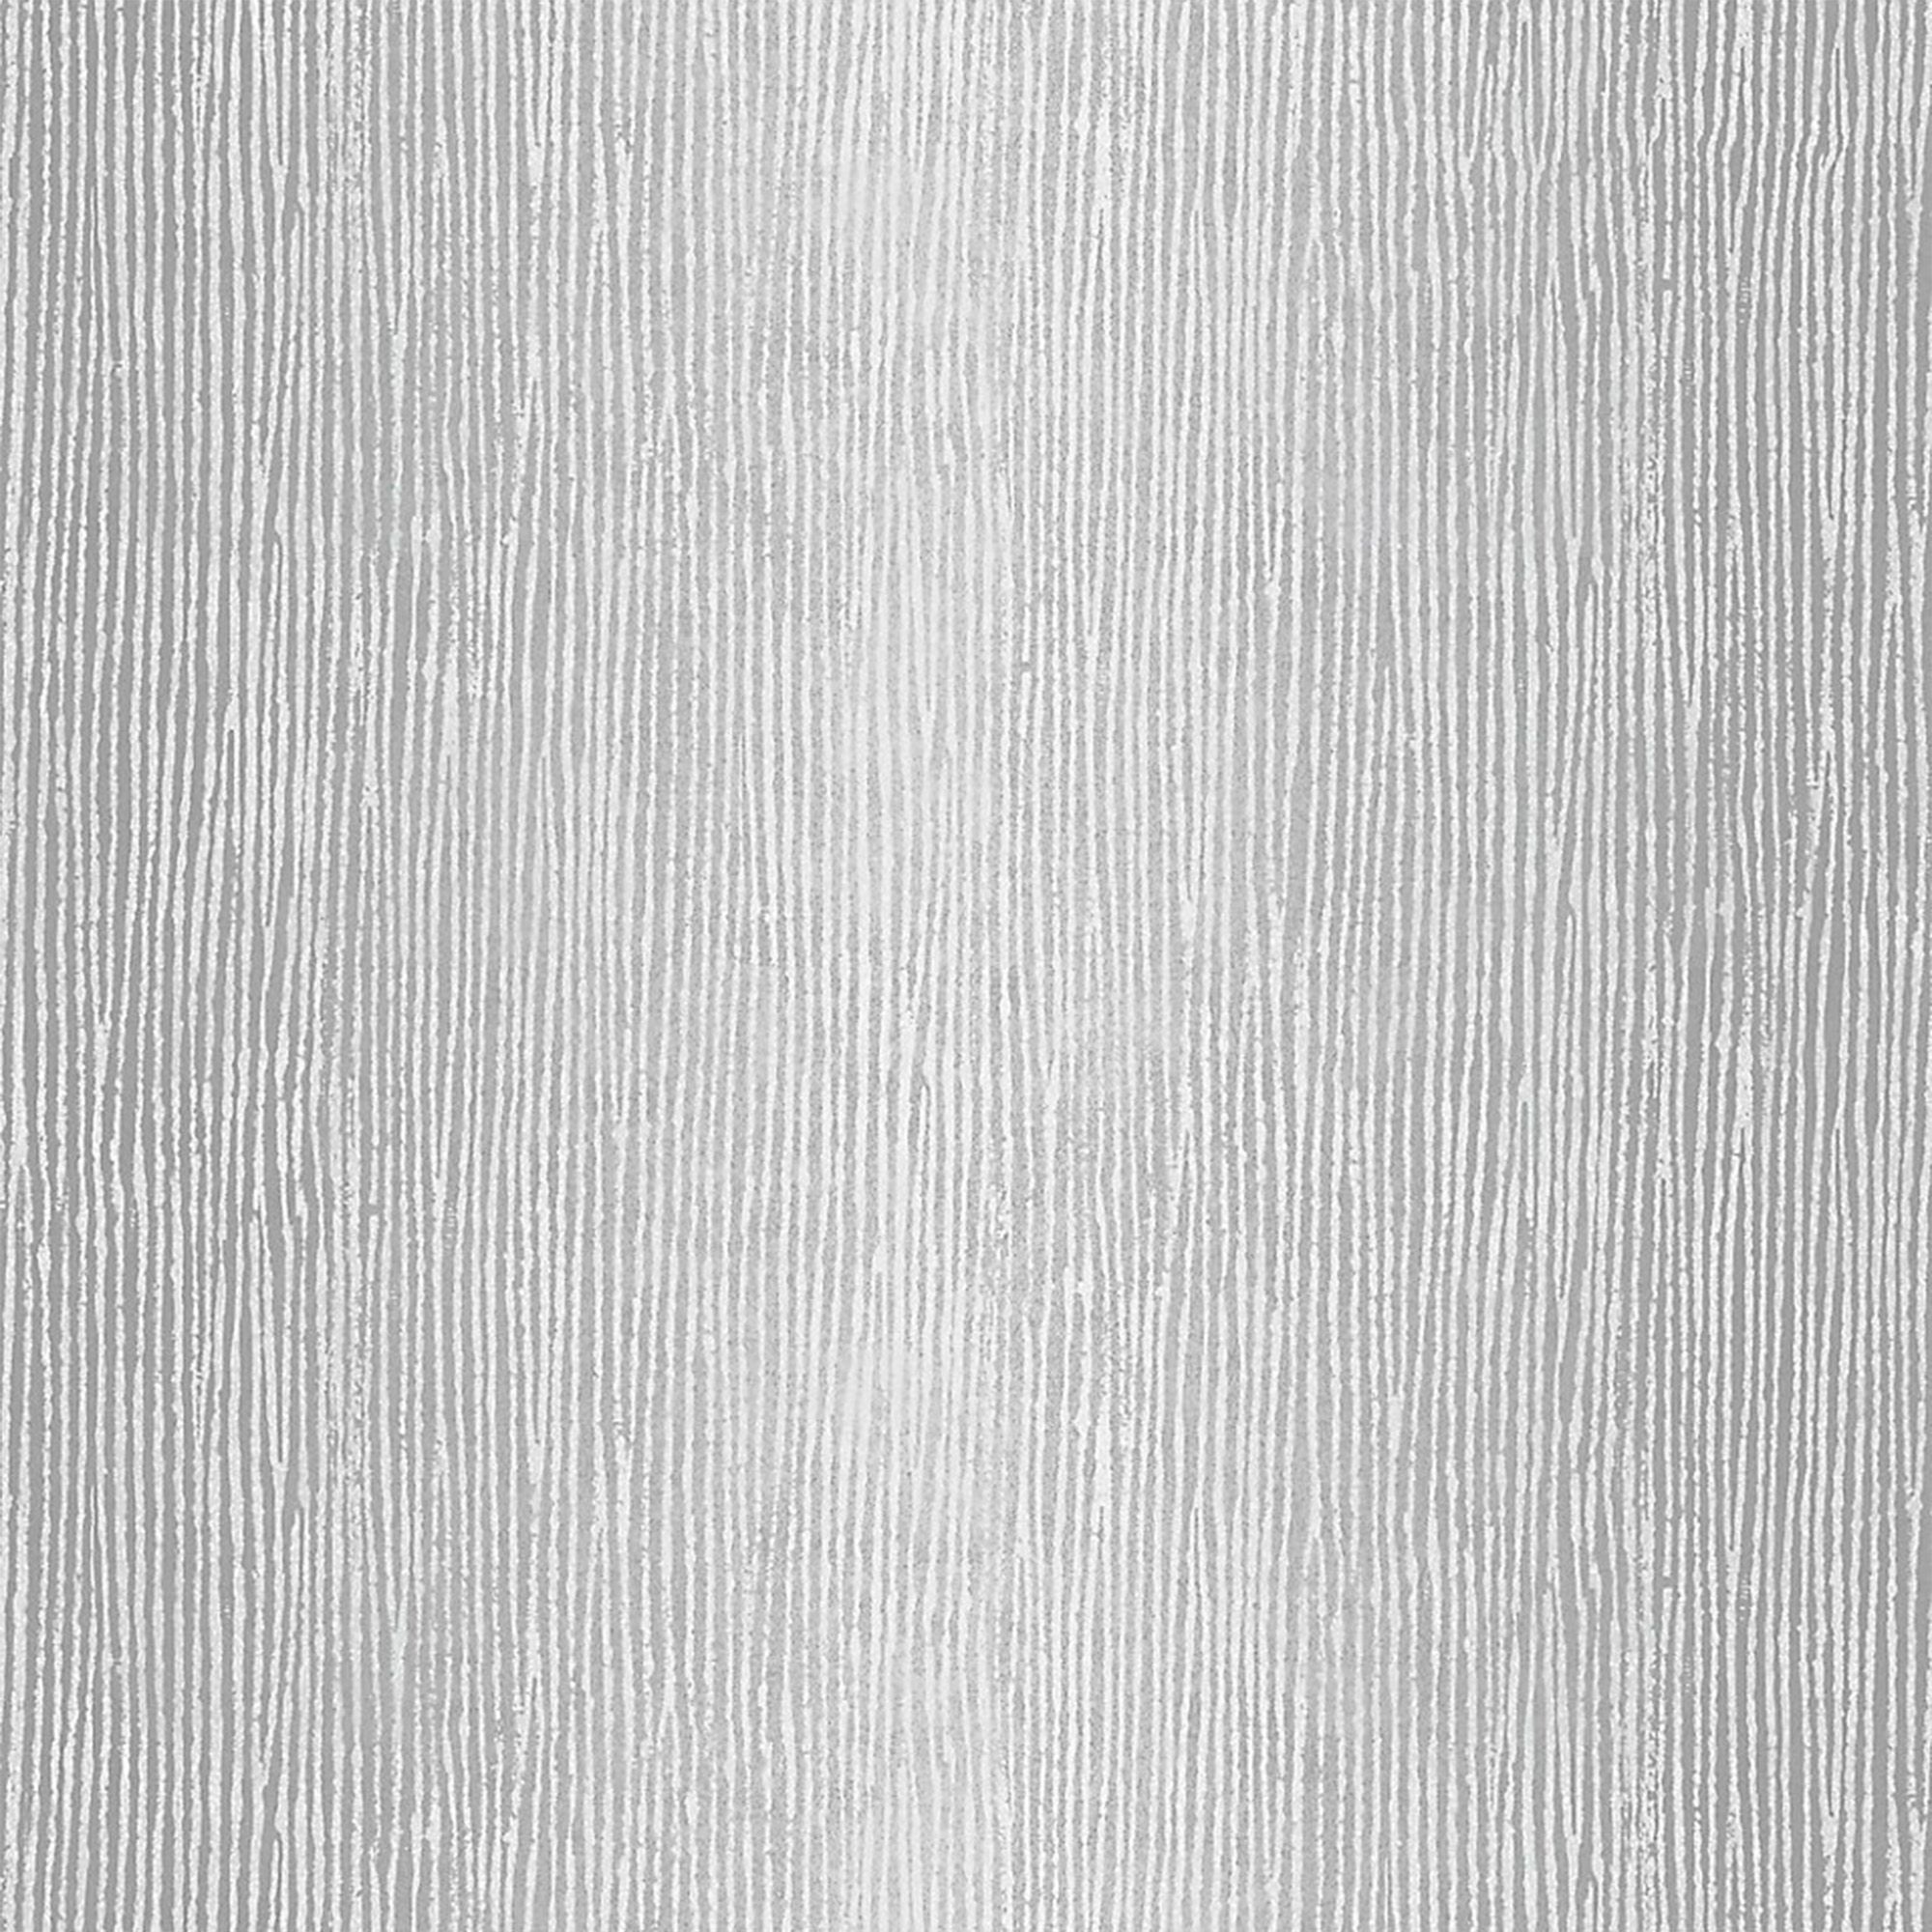 GoodHome Bloxholm Grey Silver effect Striped Textured Wallpaper